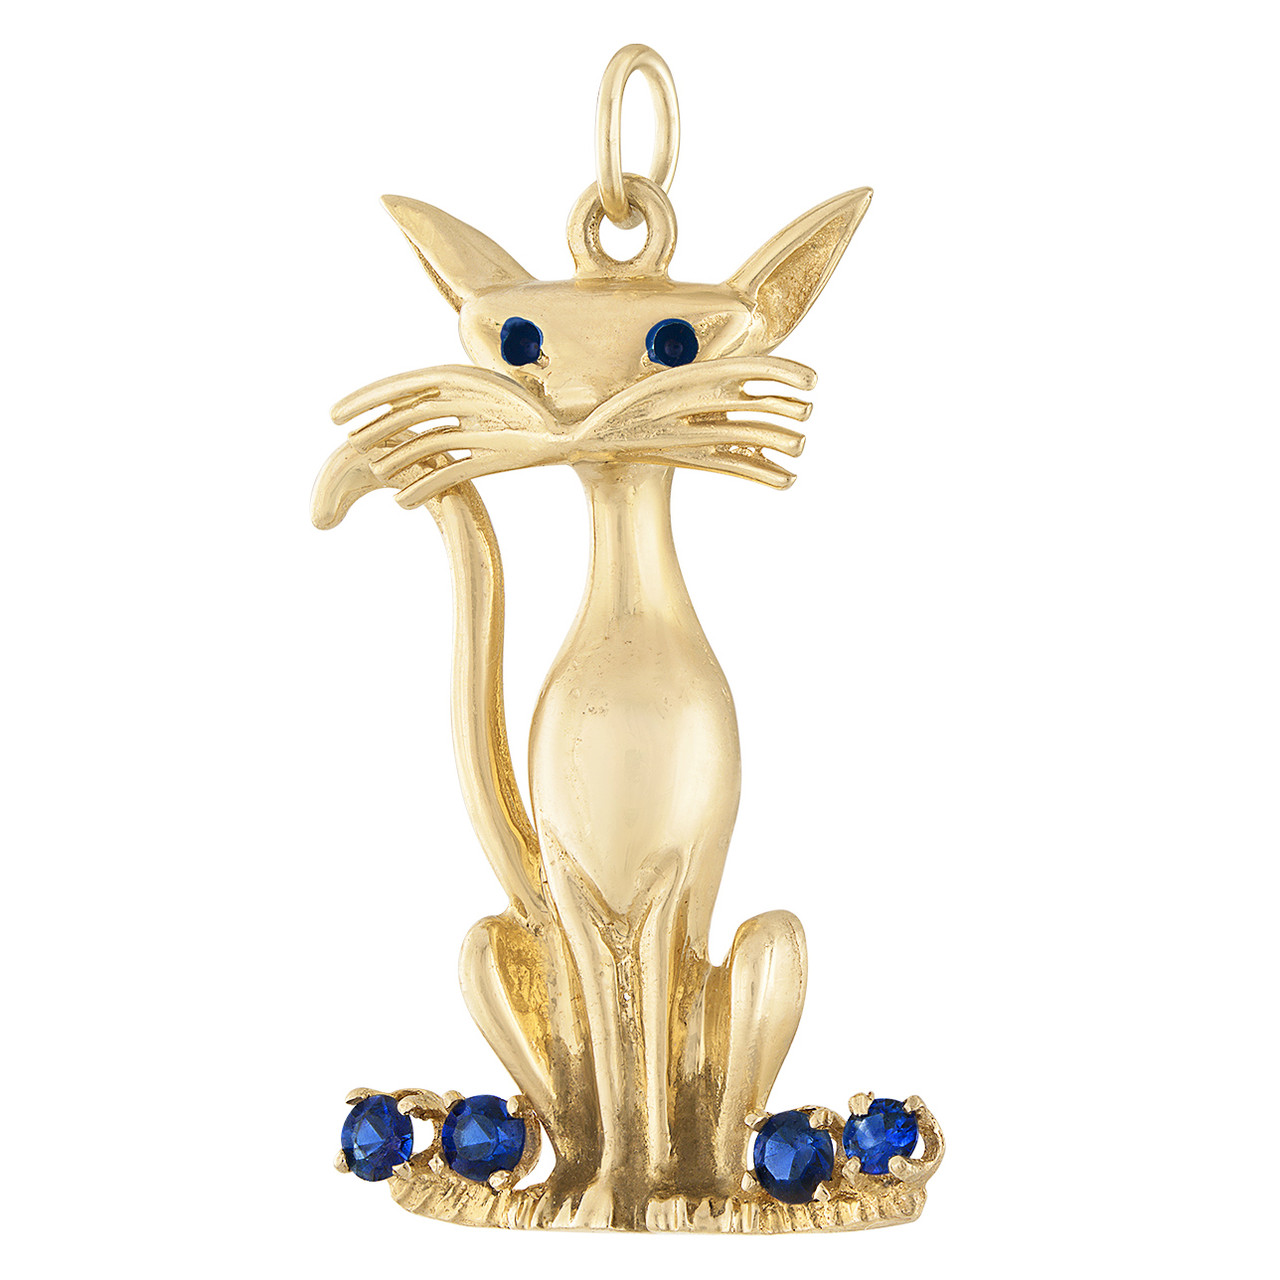 Buy 10pc Cat Charms, Animal Charms, Gold Cat Charms, Dangles